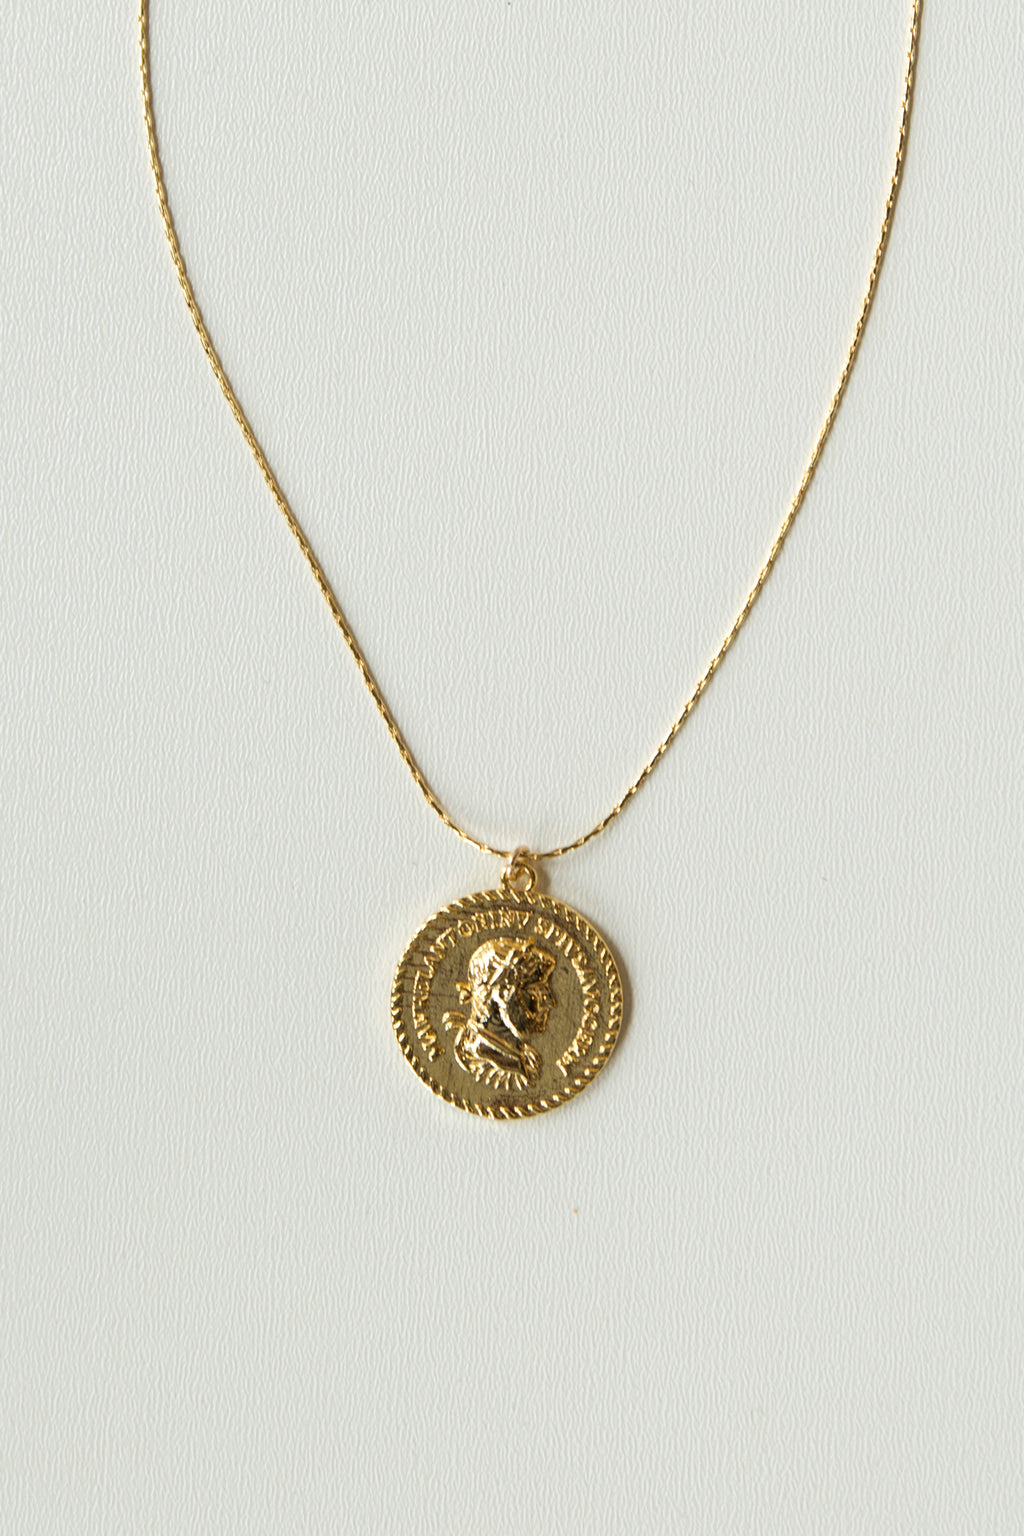 mode, double layer coin necklace- large coin